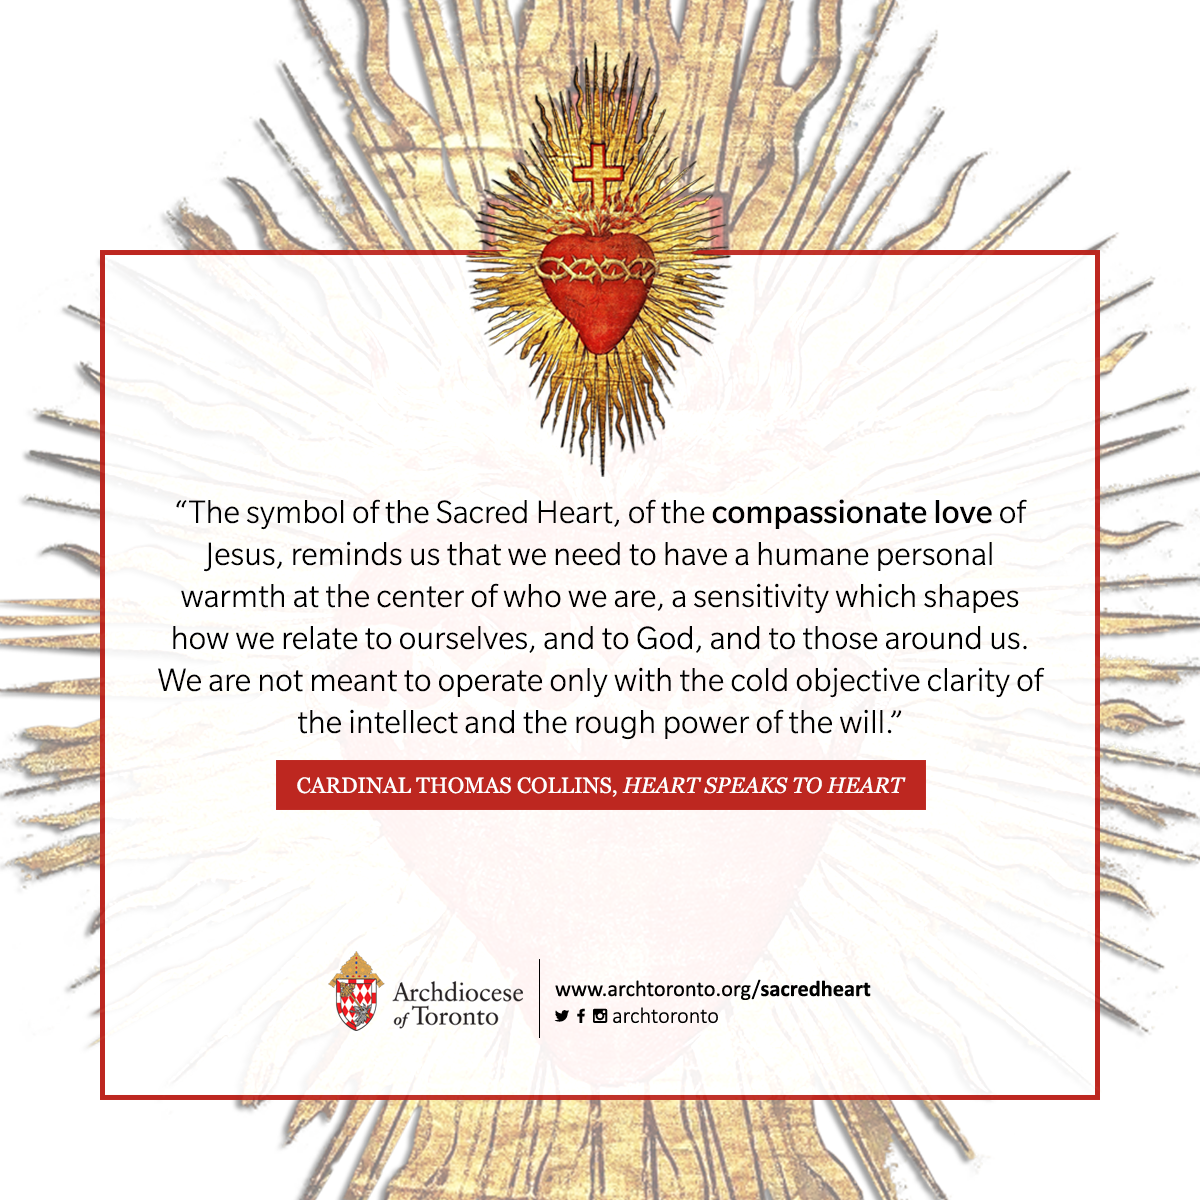 The symbol of the Sacred Heart, of the compassionate love of Jesus, reminds us that we need to have a humane personal warmth at the center of who we are, a sensitivity which shapes how we relate to ourselves, and to God, and to those around us. We are not meant to operate only with the cold objective clarity of the intellect and the rough power of the will.